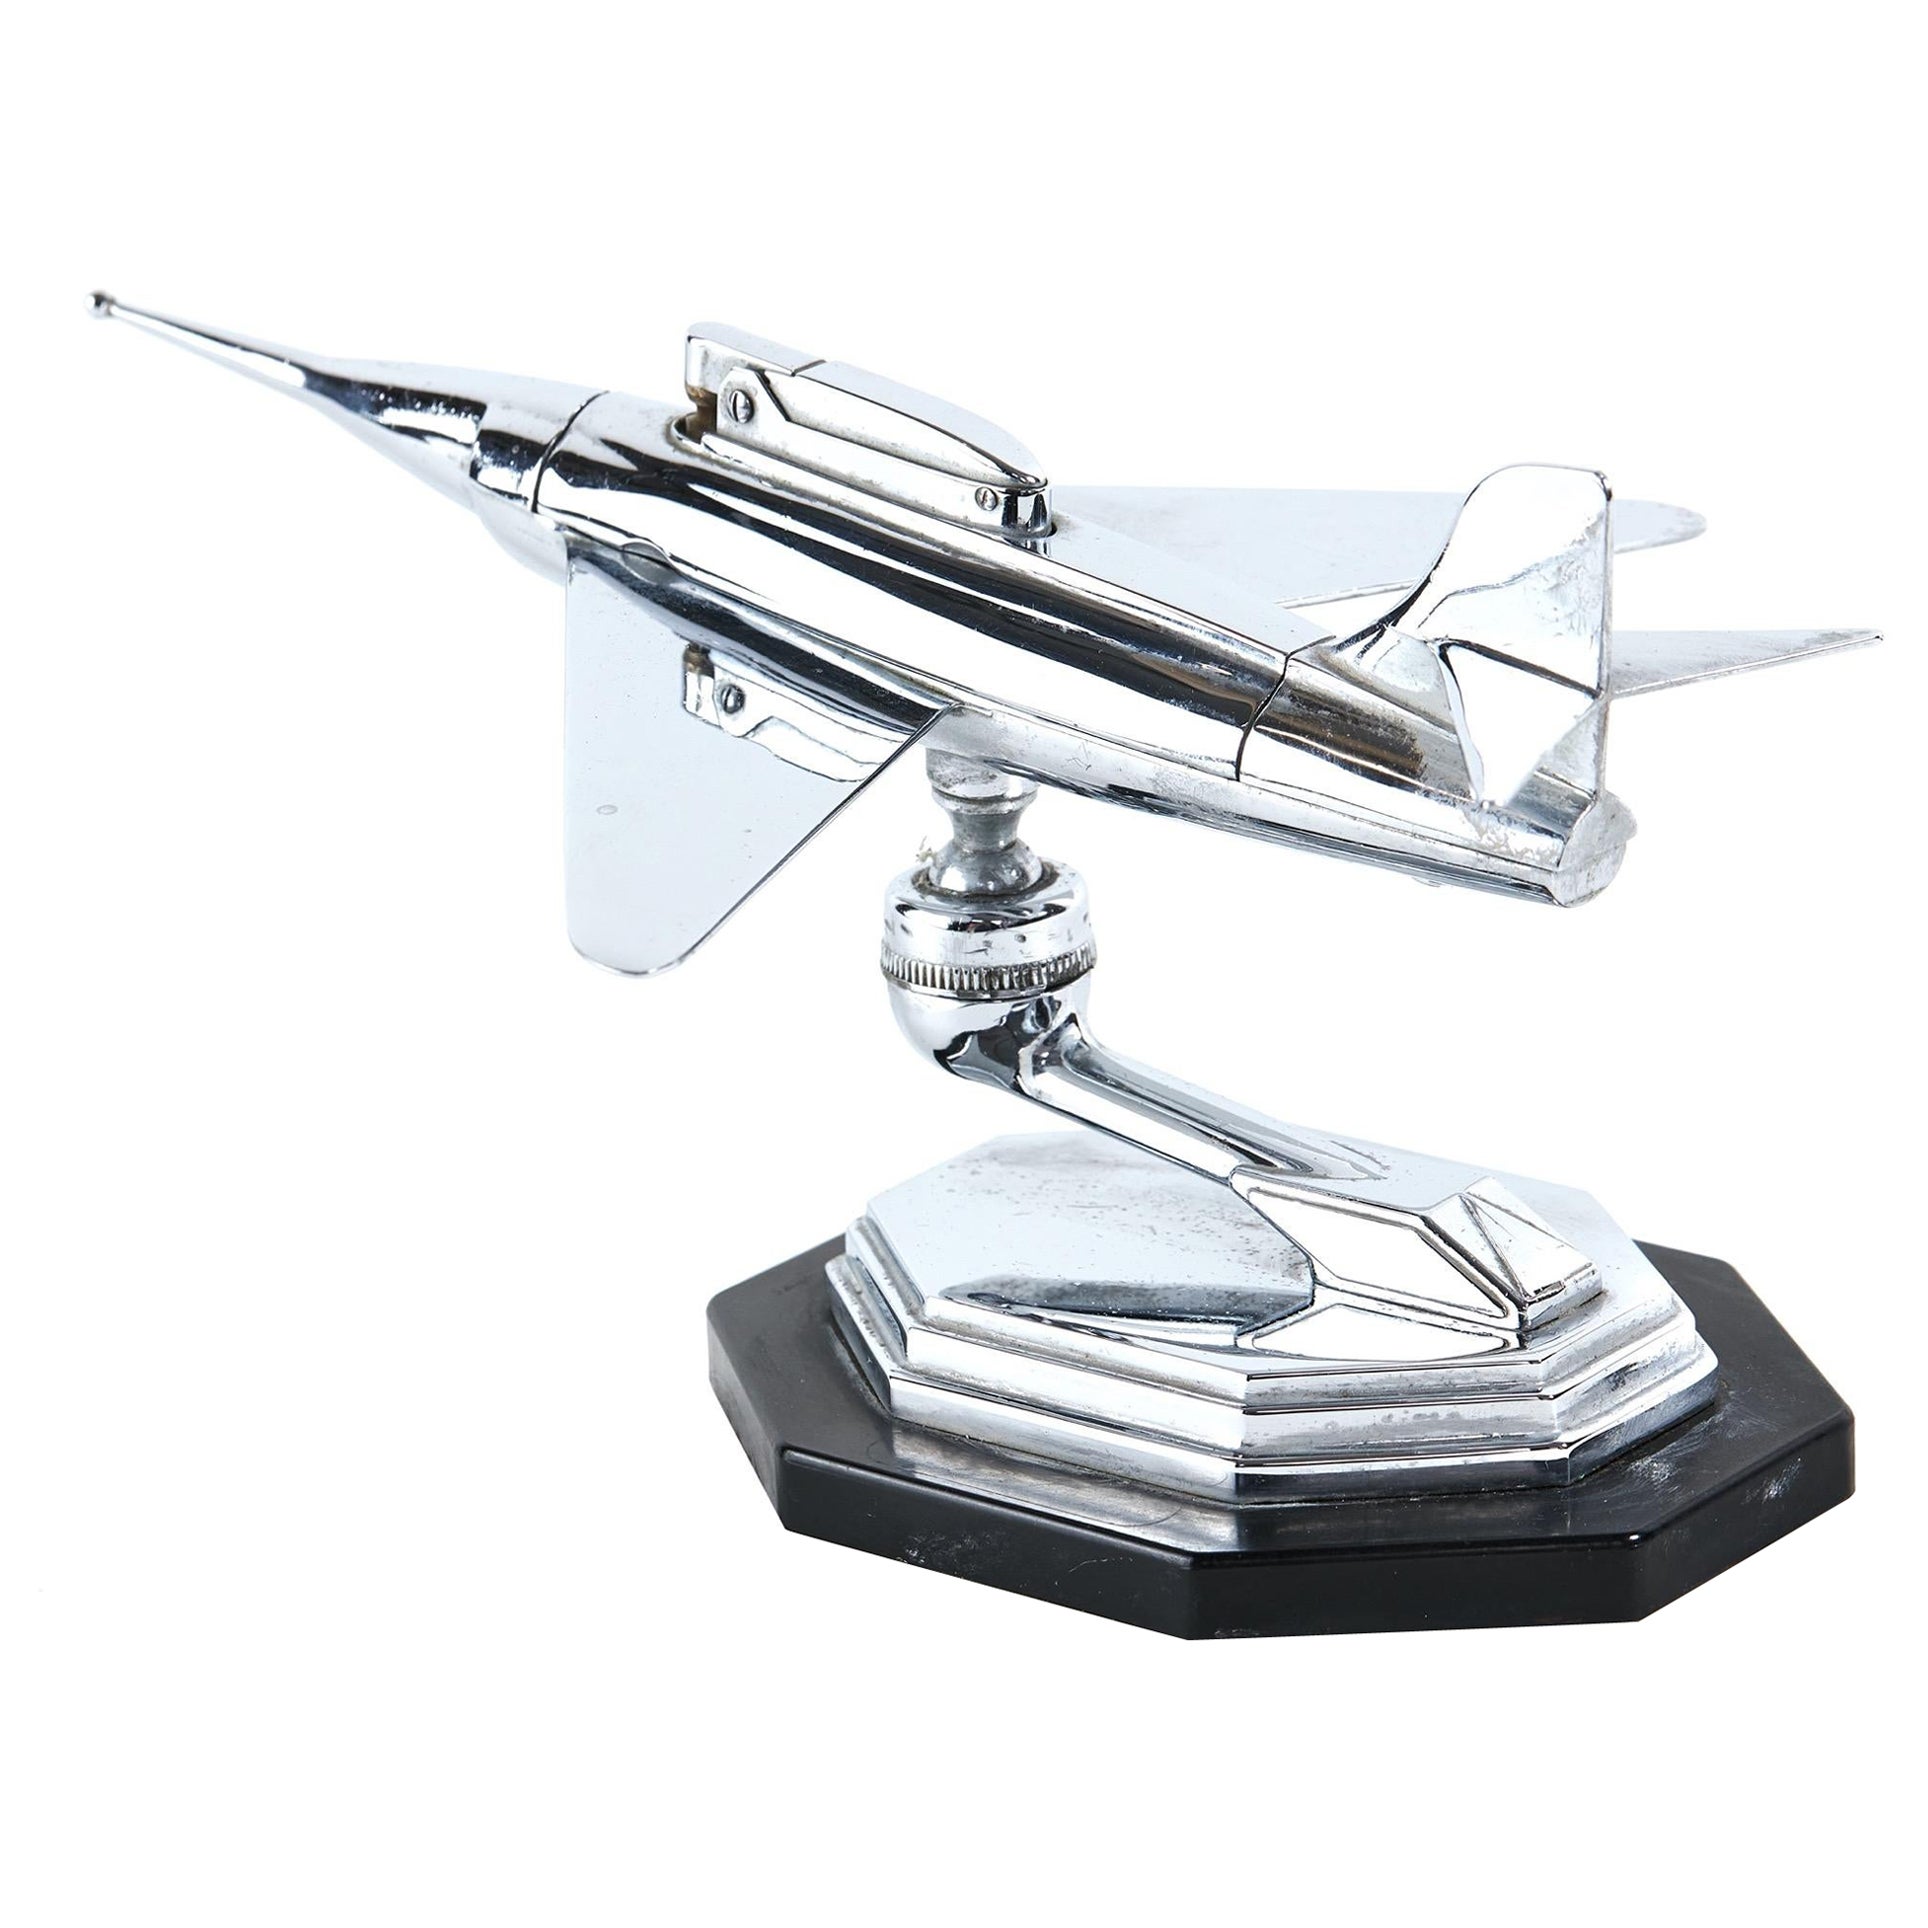 1950s Gala Sonic Chrome Model of a Jet Plane  For Sale